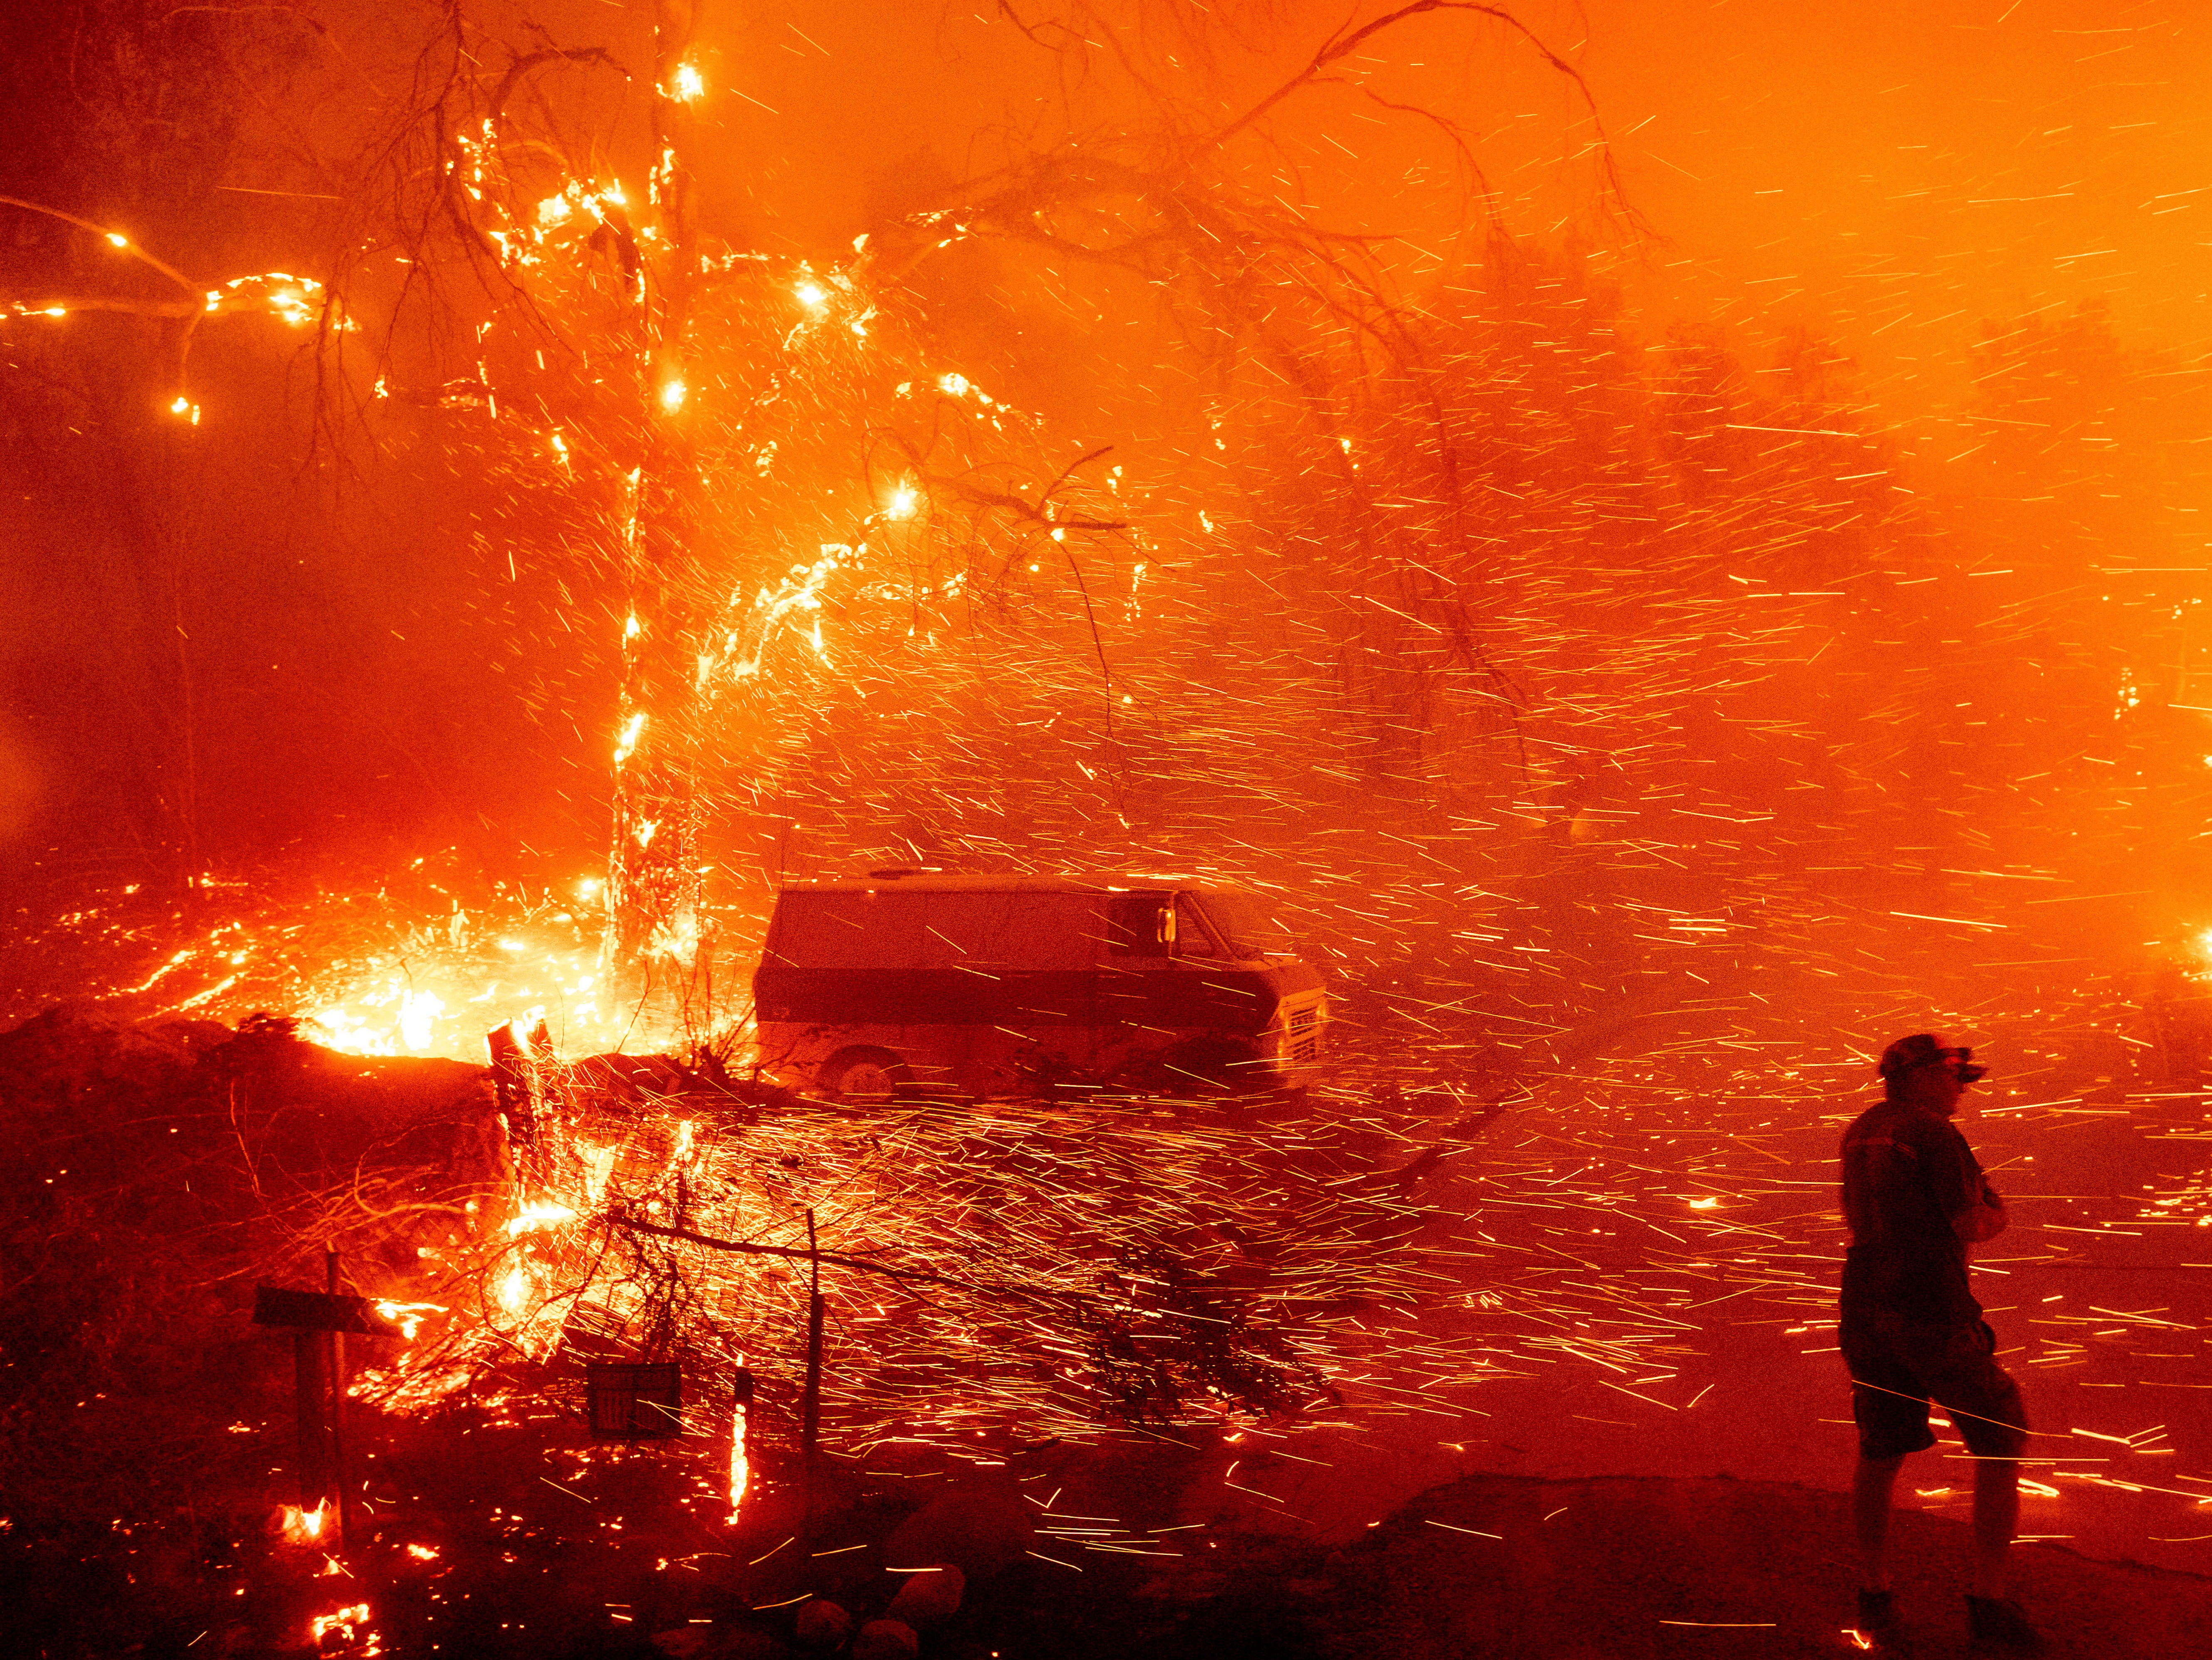 <p>Bruce McDougal prepares to defend his home as the Bond Fire burns though the Silverado community in Orange County, California, on 3 December 2020</p>